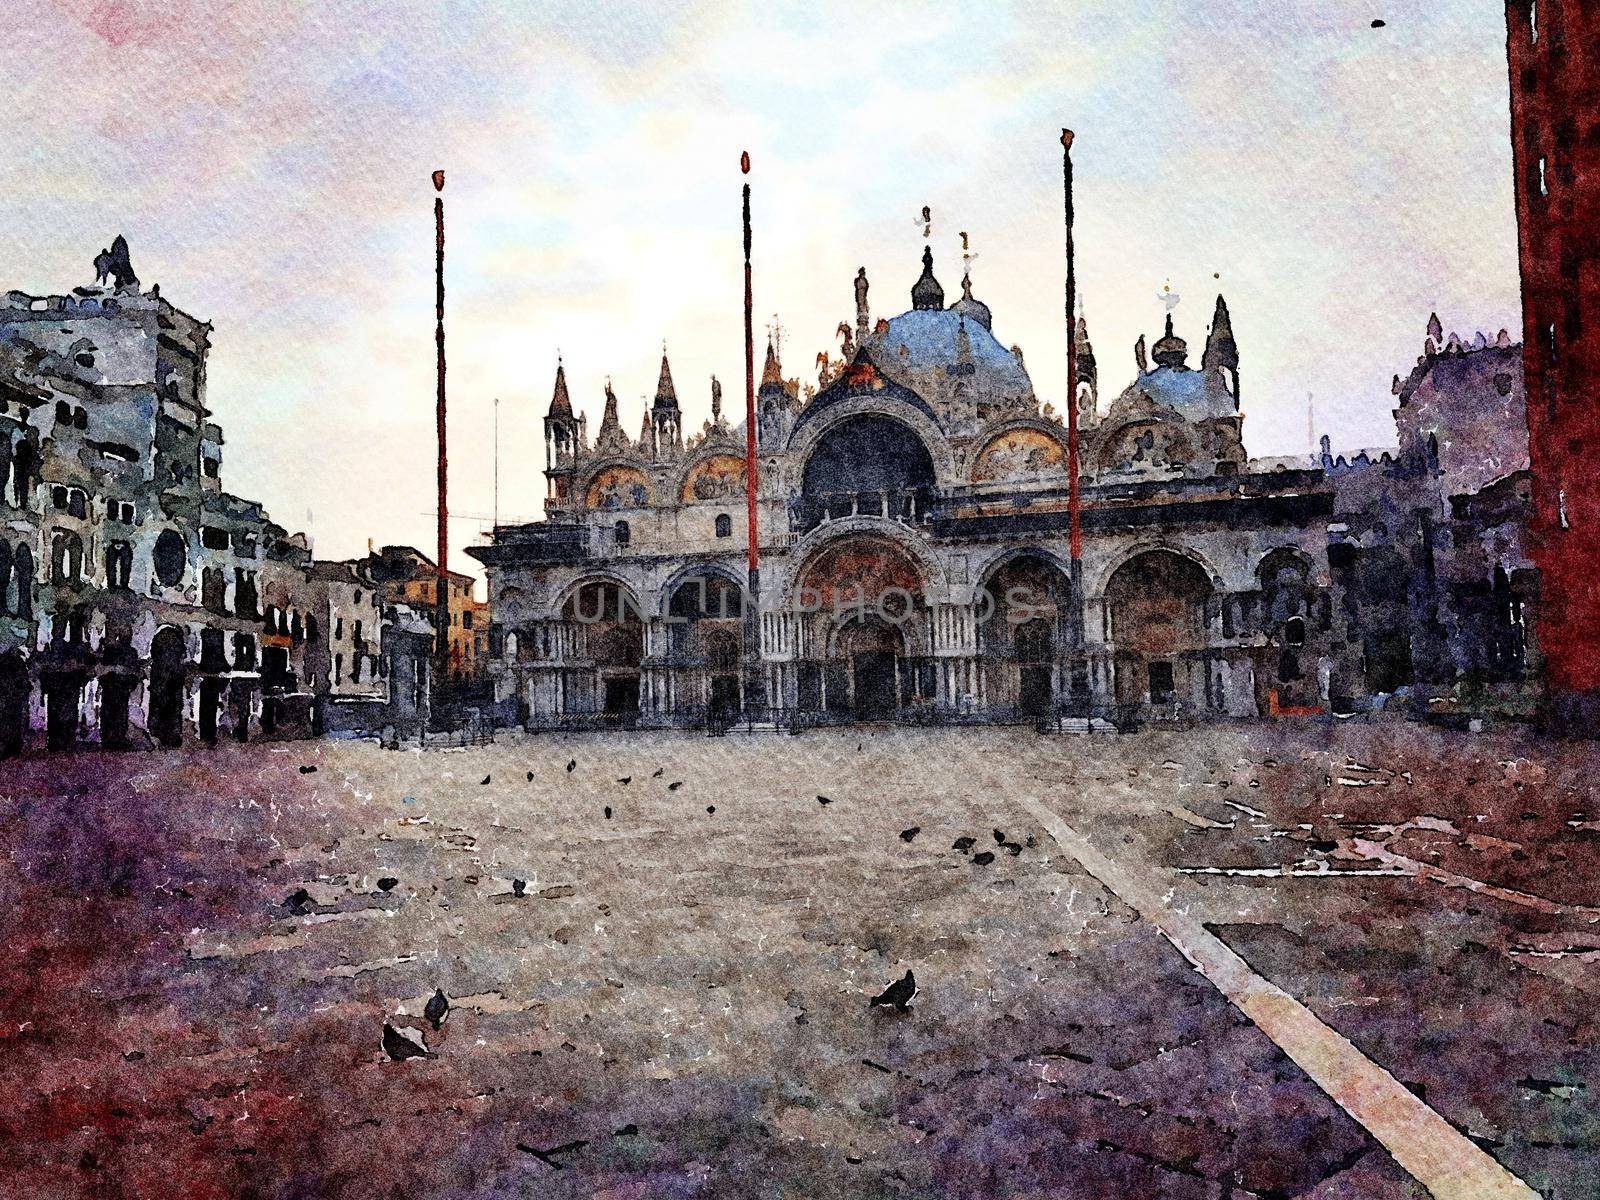 Watercolor which represents a glimpse of the main square and the cathedral of Venice